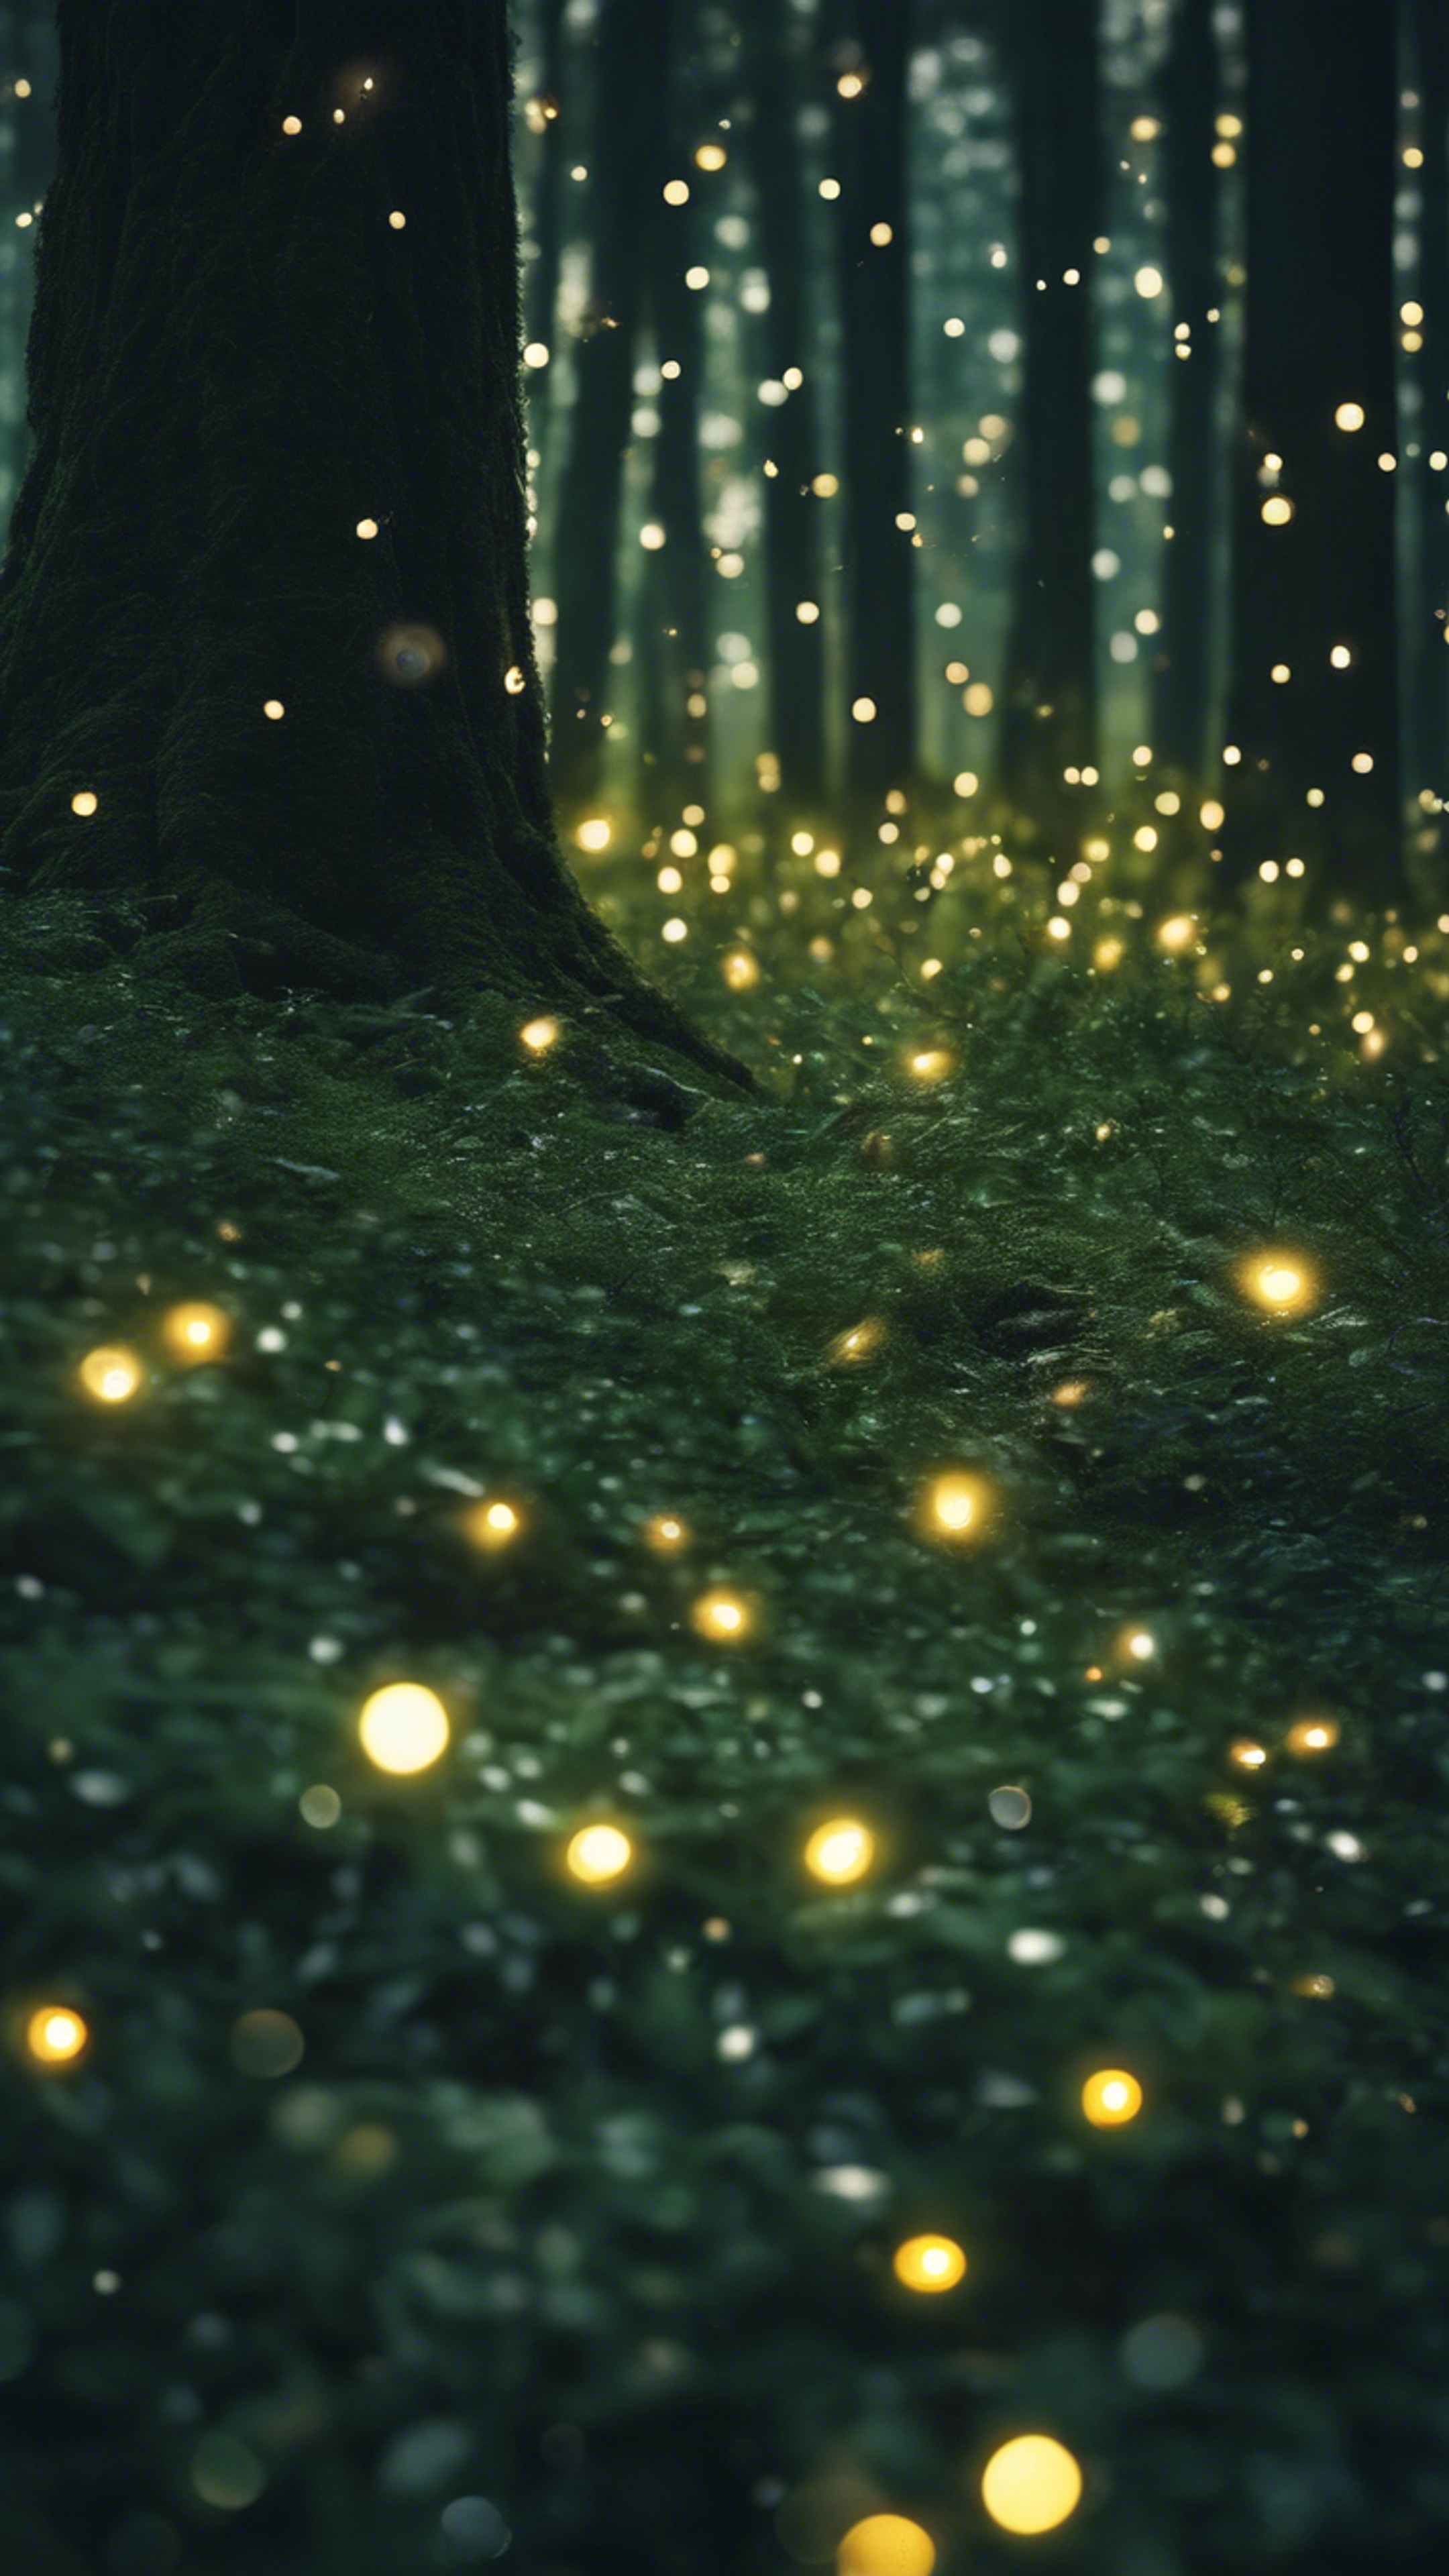 A dark green forest in the twilights, flecked with shimmering fireflies. Wallpaper[48f2b28e2b5742fcbebf]